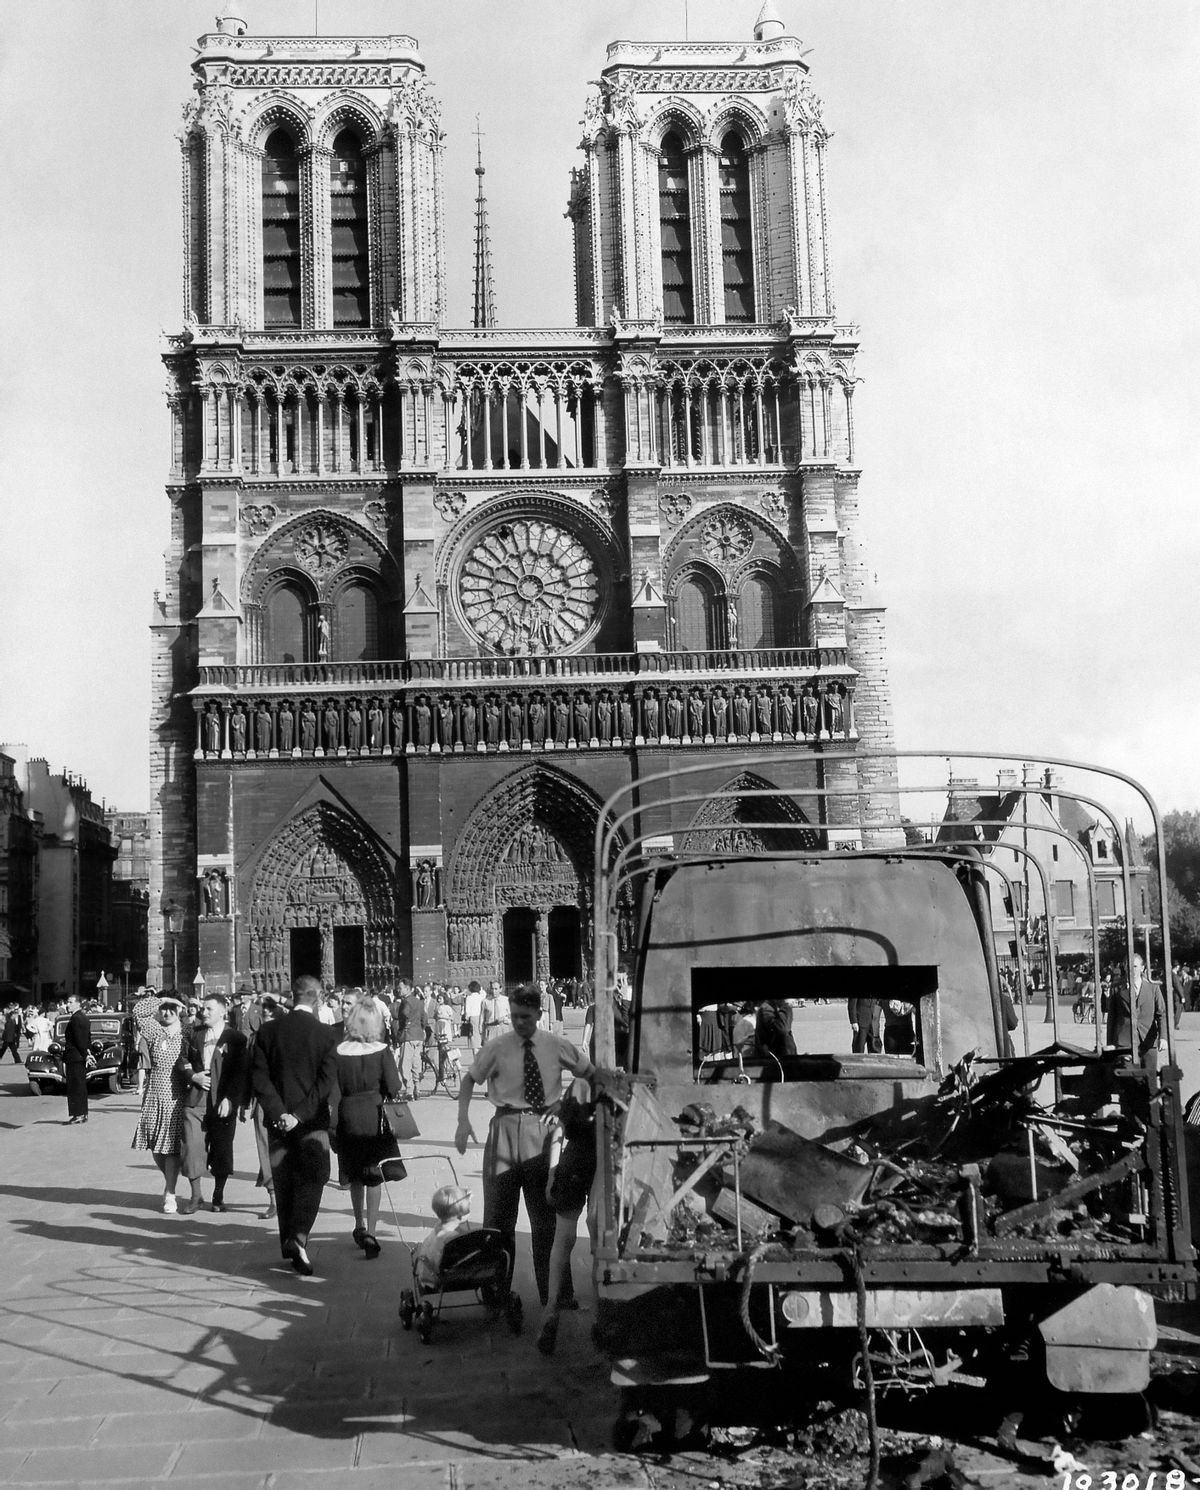 In this image provided by the U.S. Army Signal Corps, French tricolors fly from the twin towers of the famous Notre Dame Cathedral in Paris on August 31, 1944, as Parisians visit the church, which escaped serious damaged during the fighting for the liberation of the French capital. Burned-out German truck in foreground is only sign of war in the vicinity. (AP Photo/U.S. Army Signal Corps) (AP)